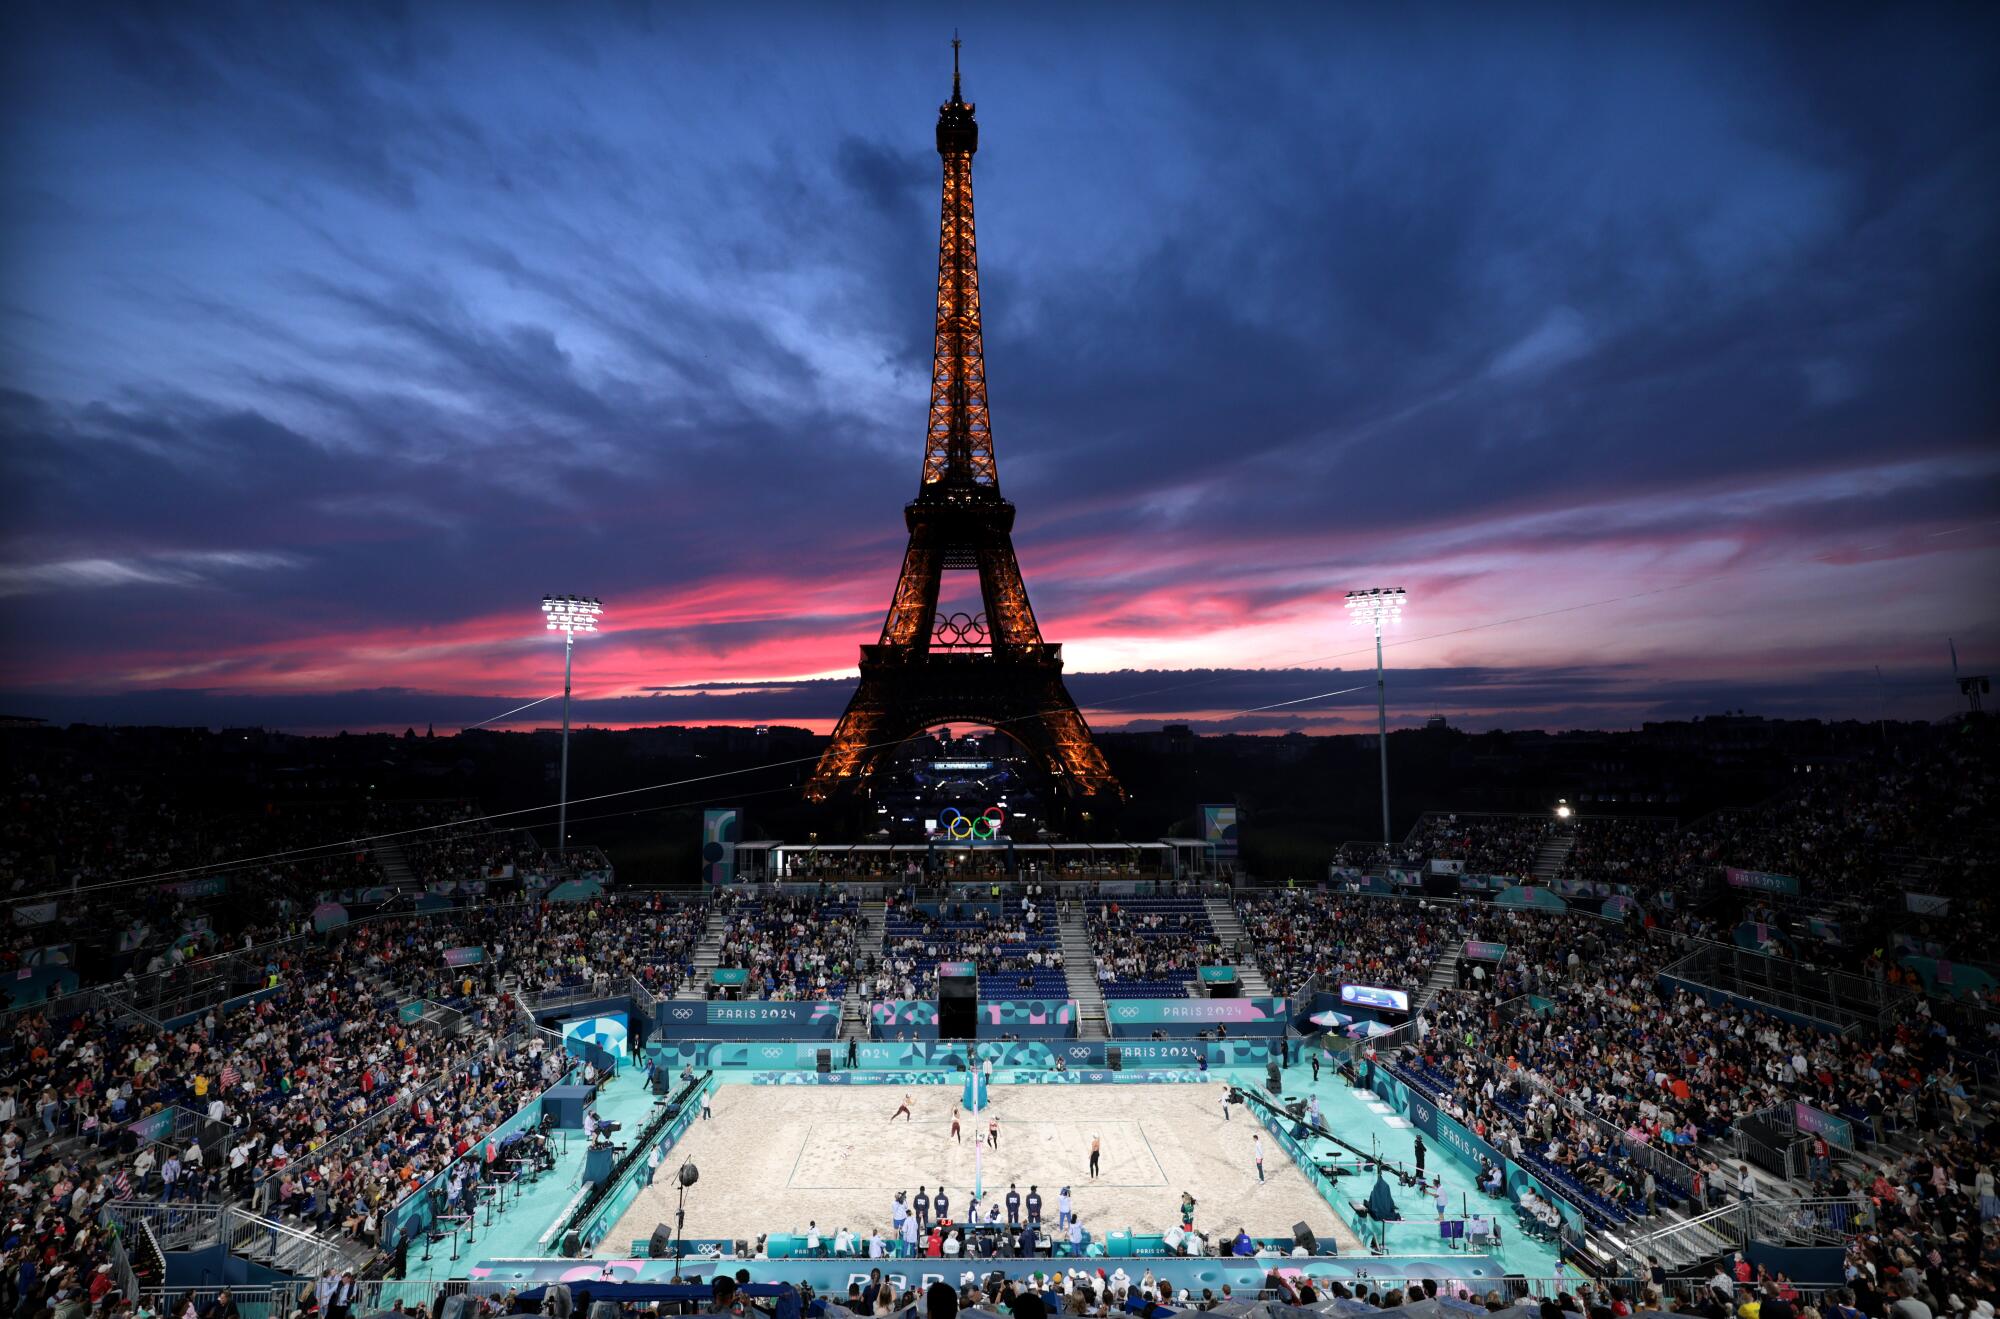 The sun sets over the Eiffel Tower as the U.S. and Canada women's beach volleyball teams warm up before a match.